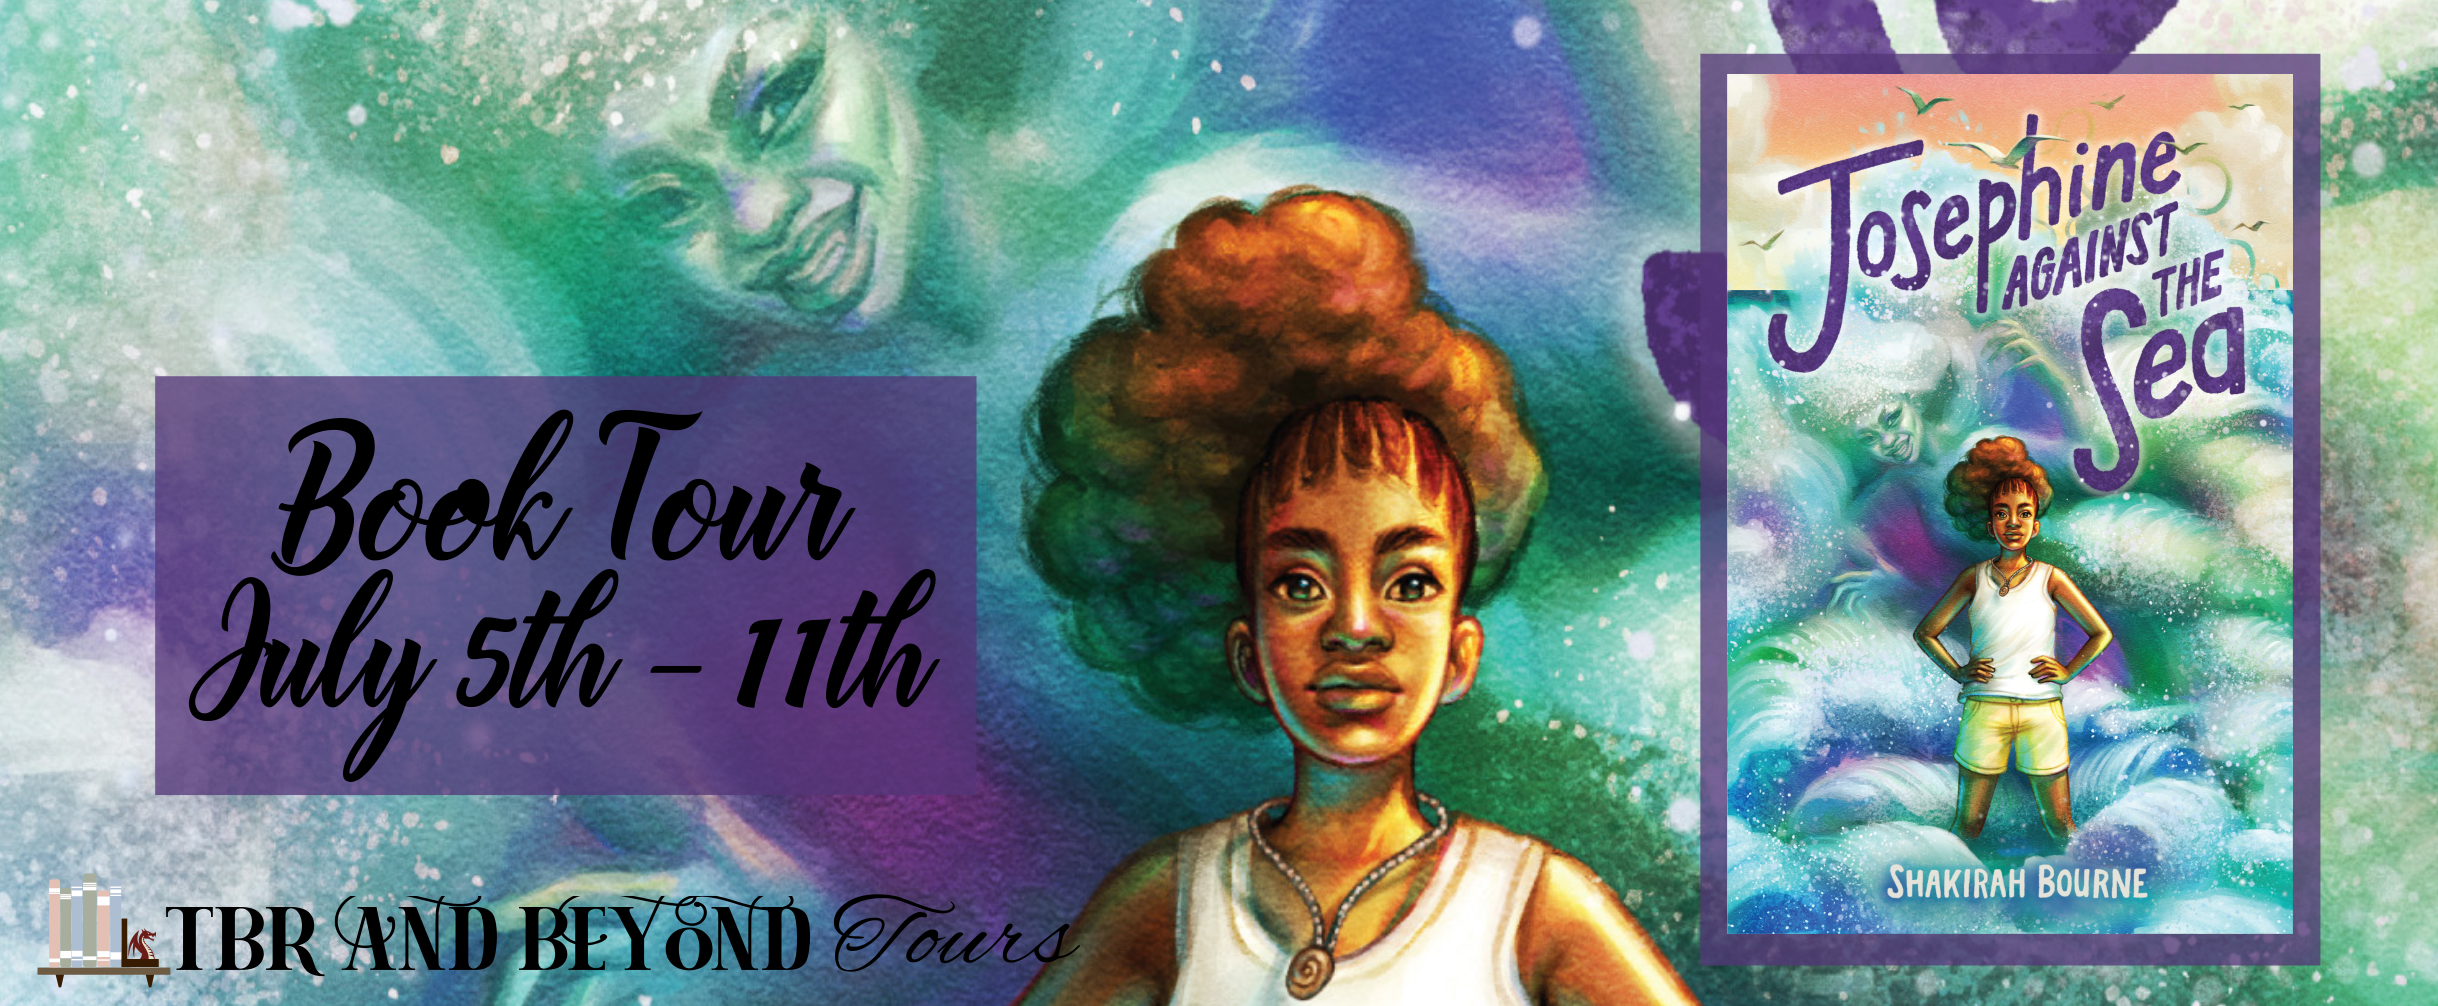 Blog Tour: Josephine Against the Sea by Shakirah Bourne (Interview!)